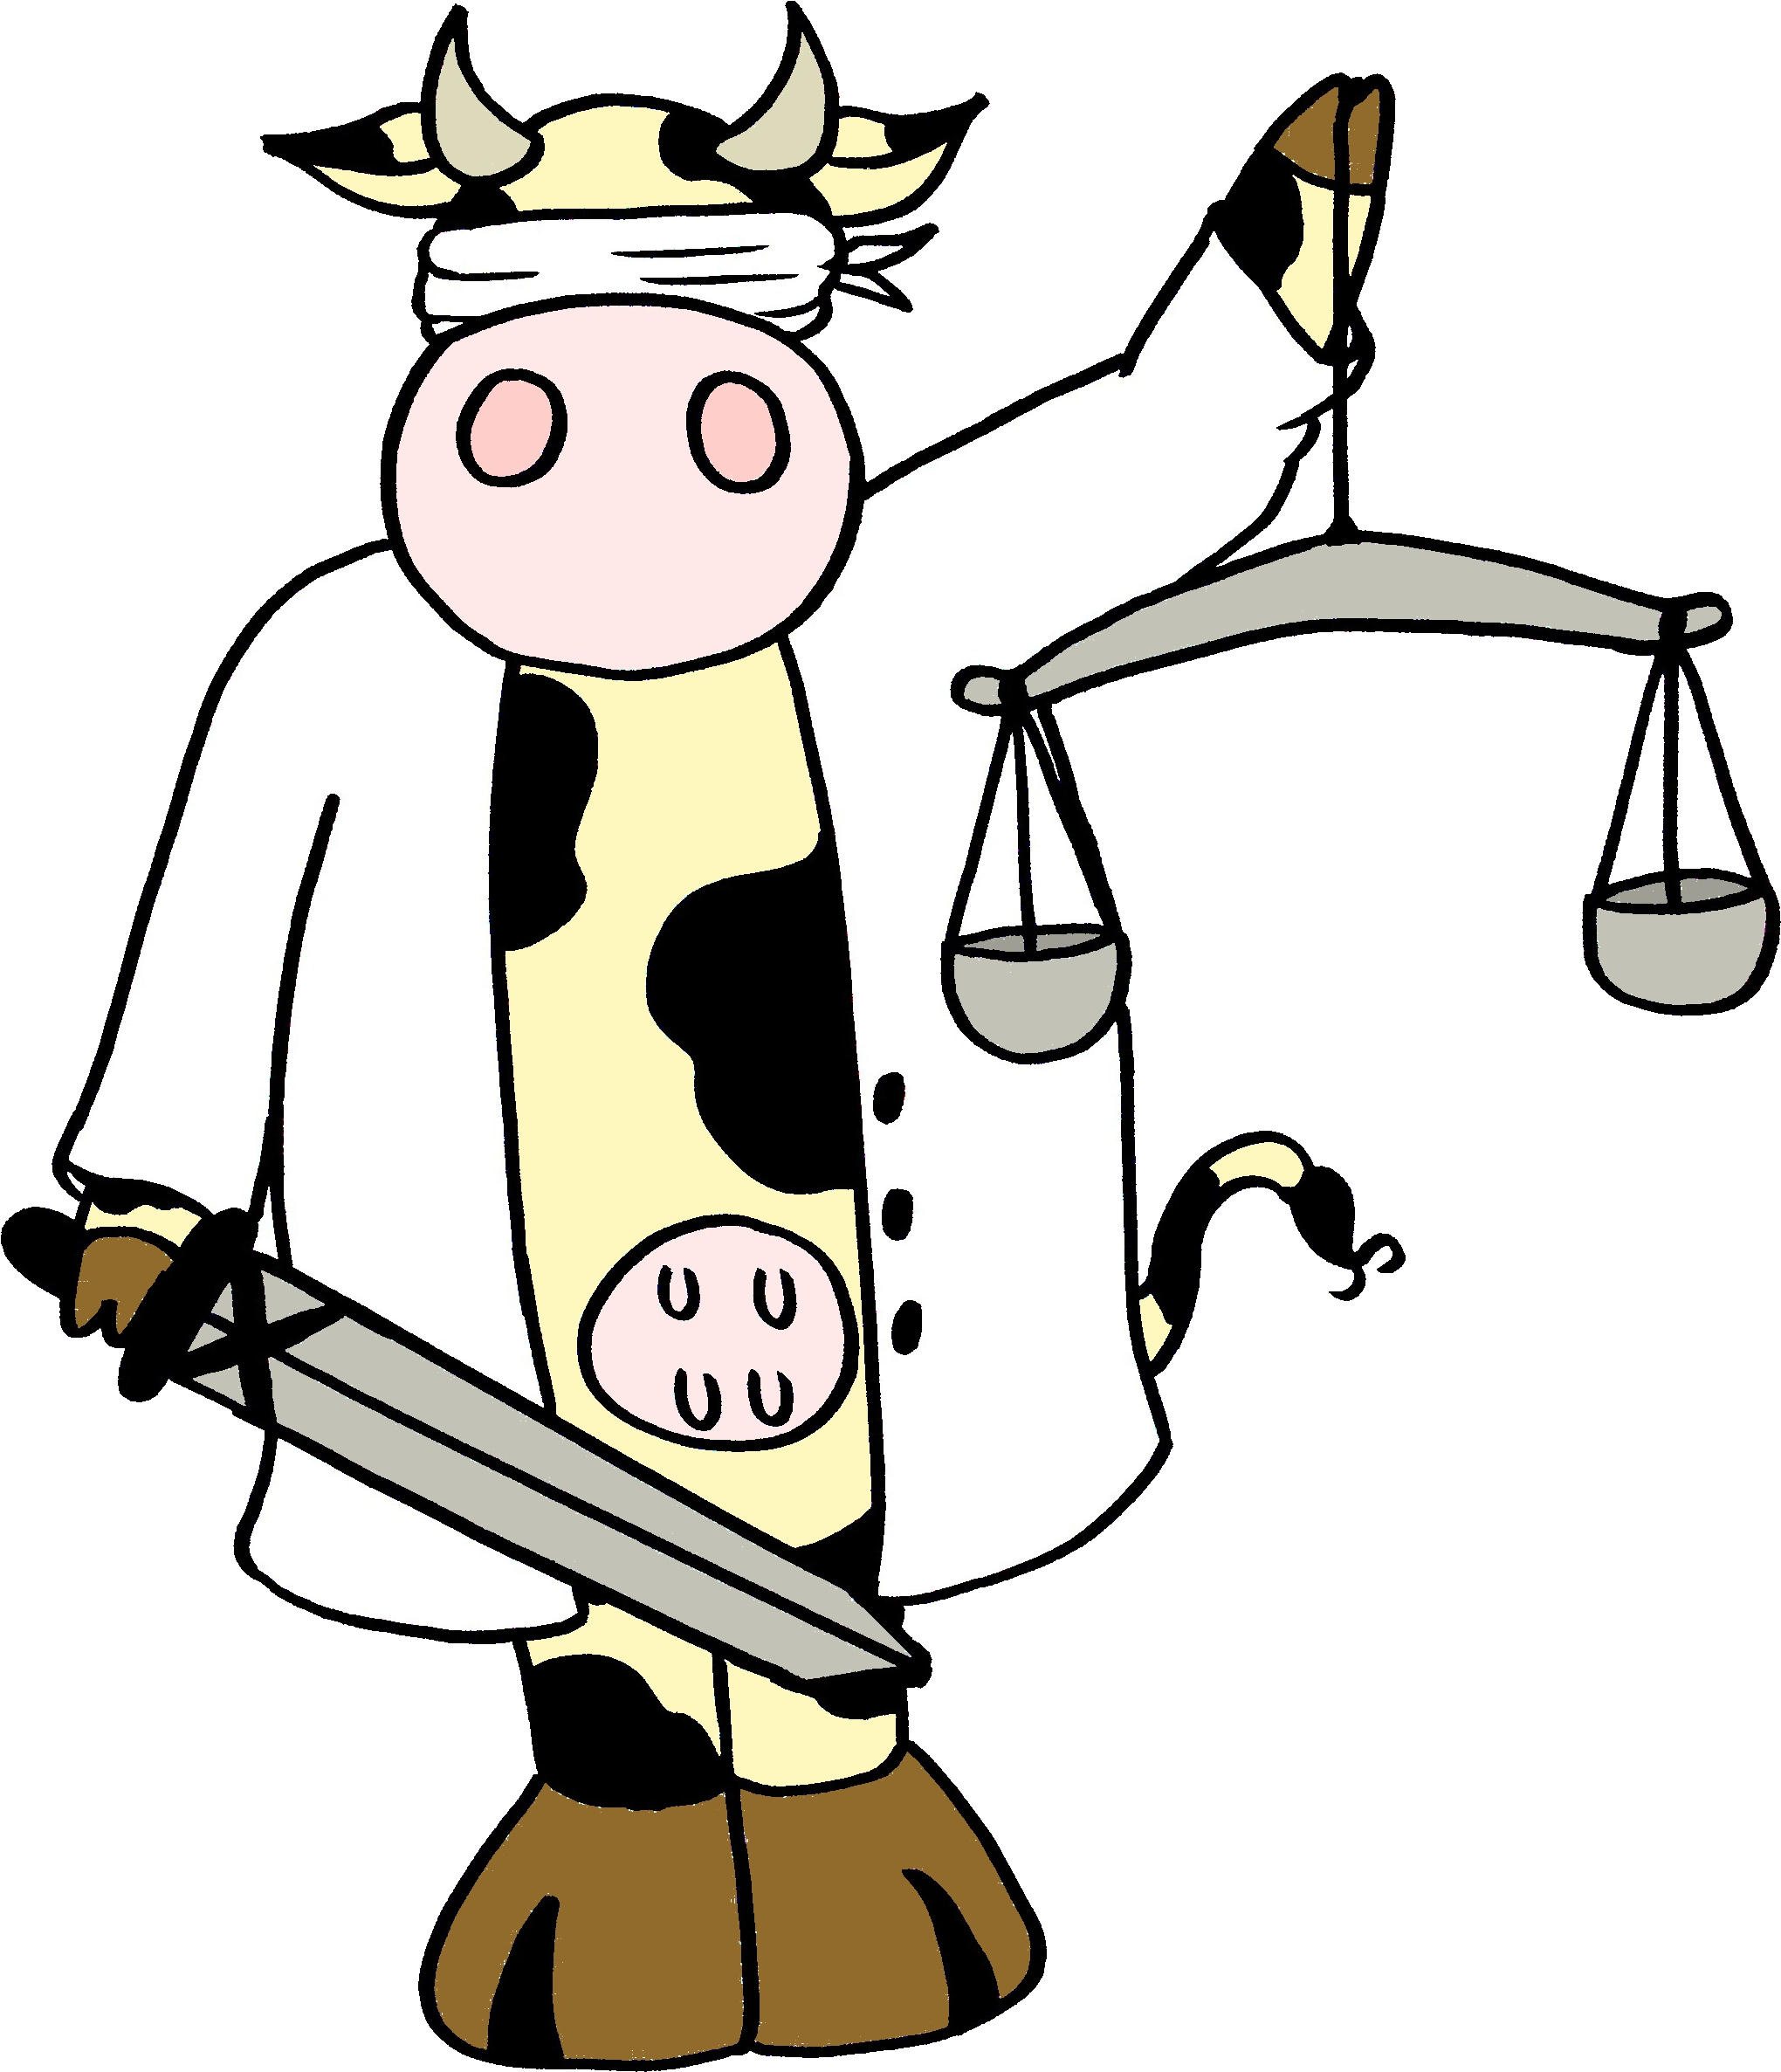 Download and share clipart about Ethics - Cartoon, Find more high quality f...